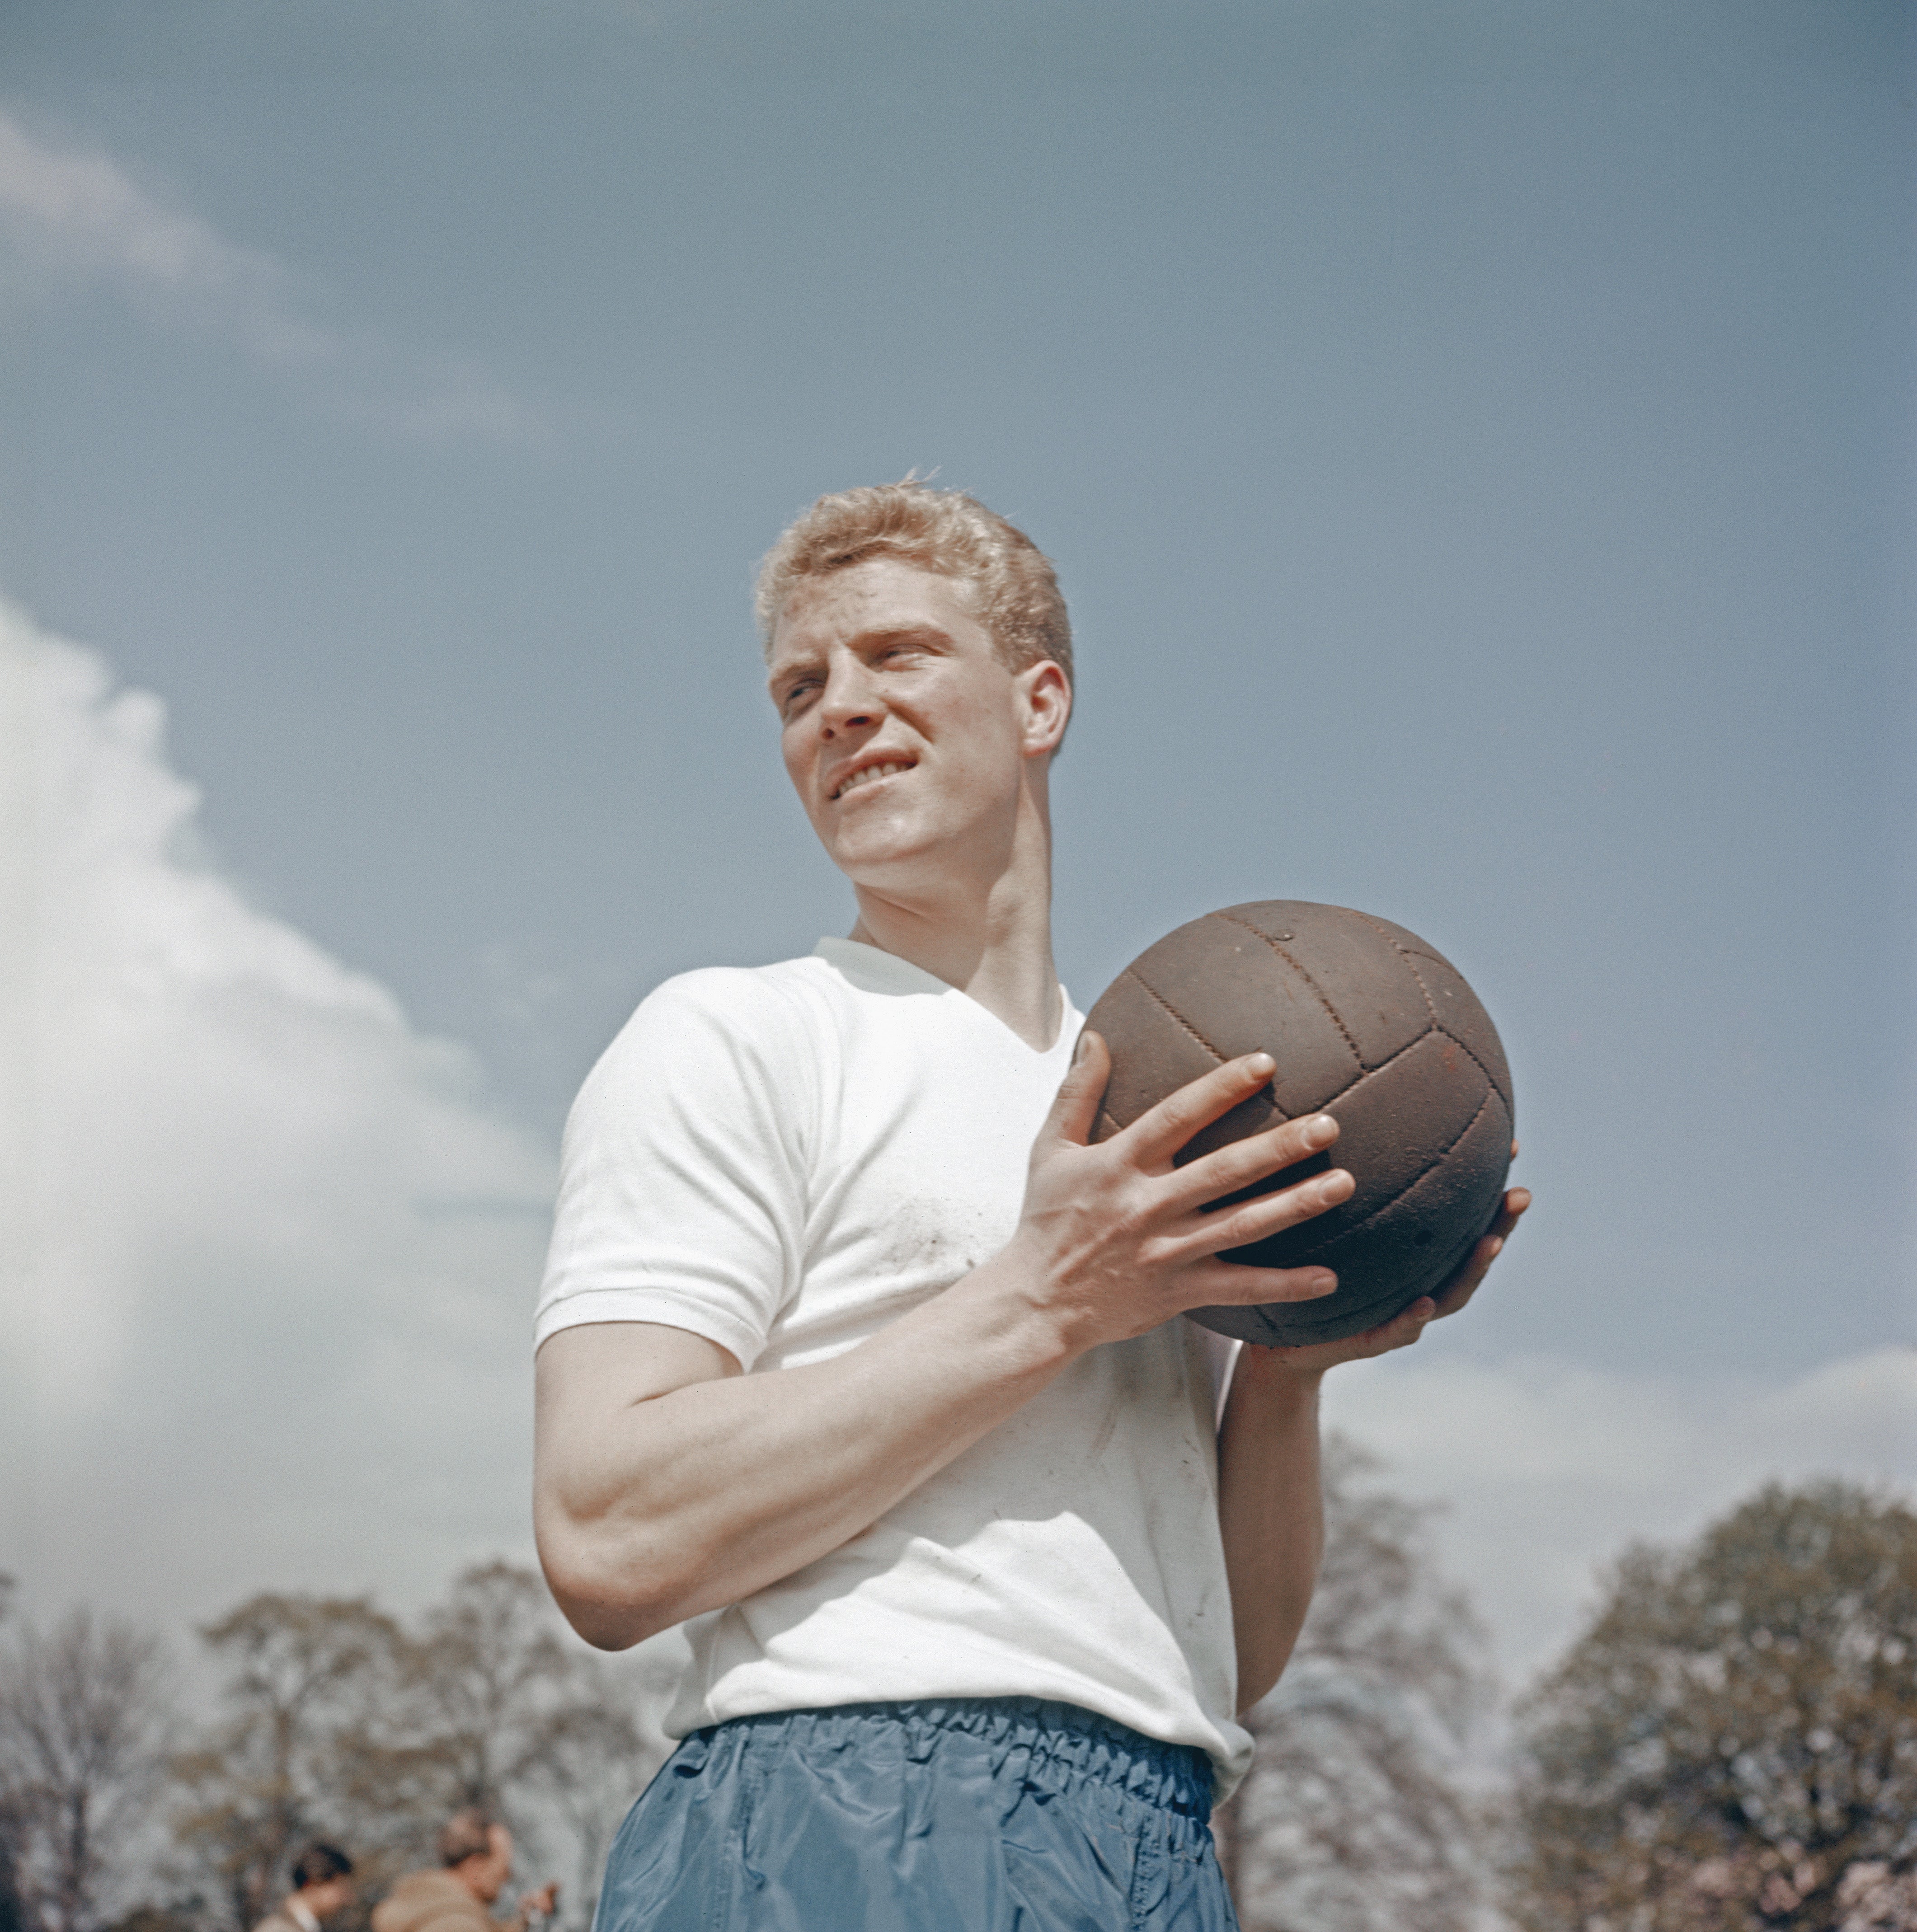 Flowers won 49 caps for England and was a member of the 1966 World Cup-winning squad